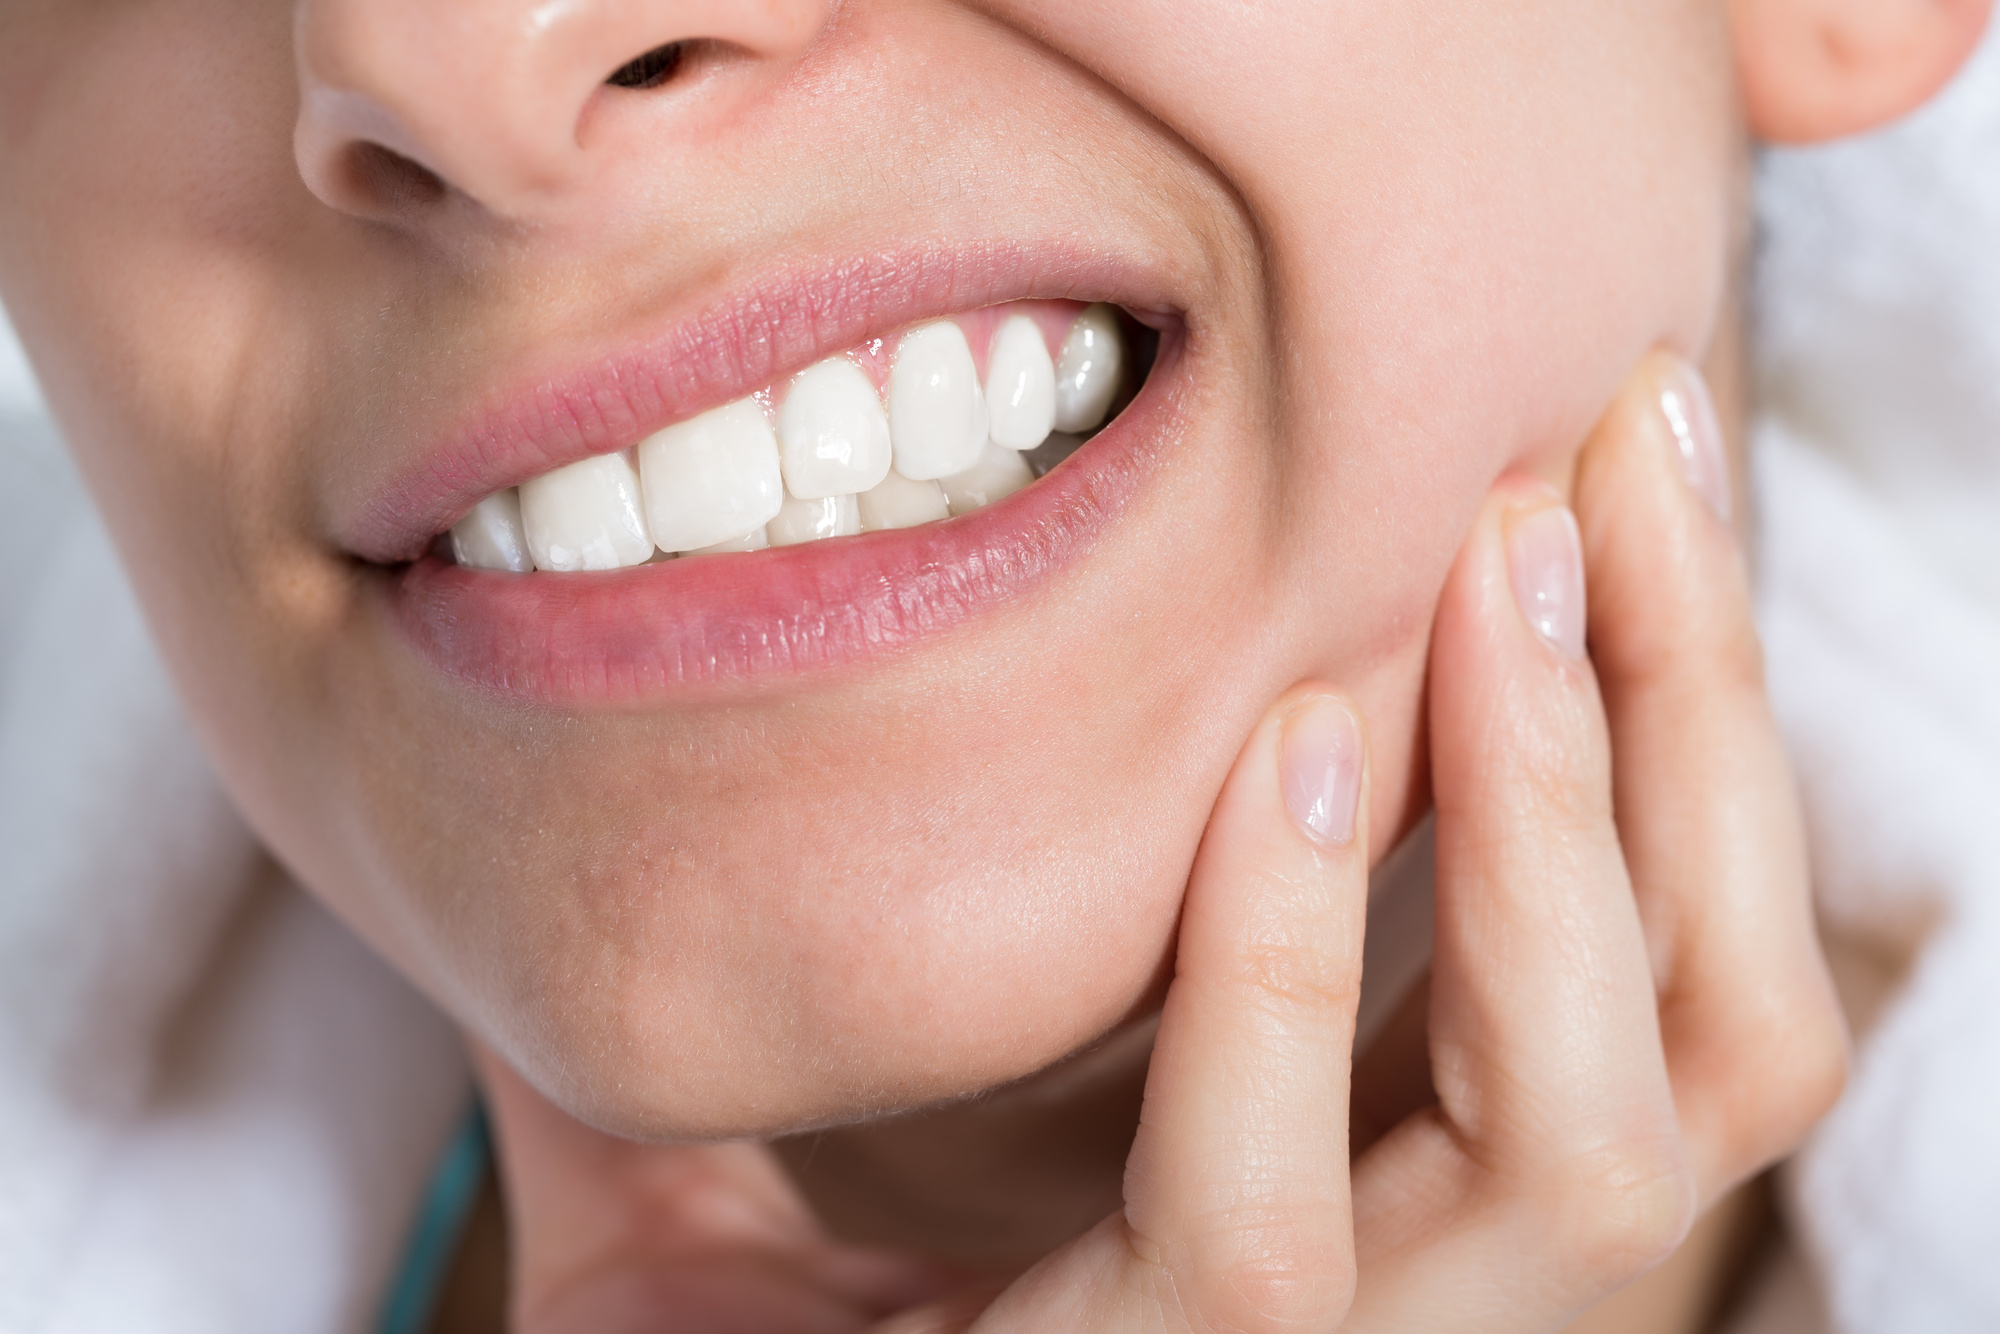 6 Tips for Improving Your Overall Dental Health